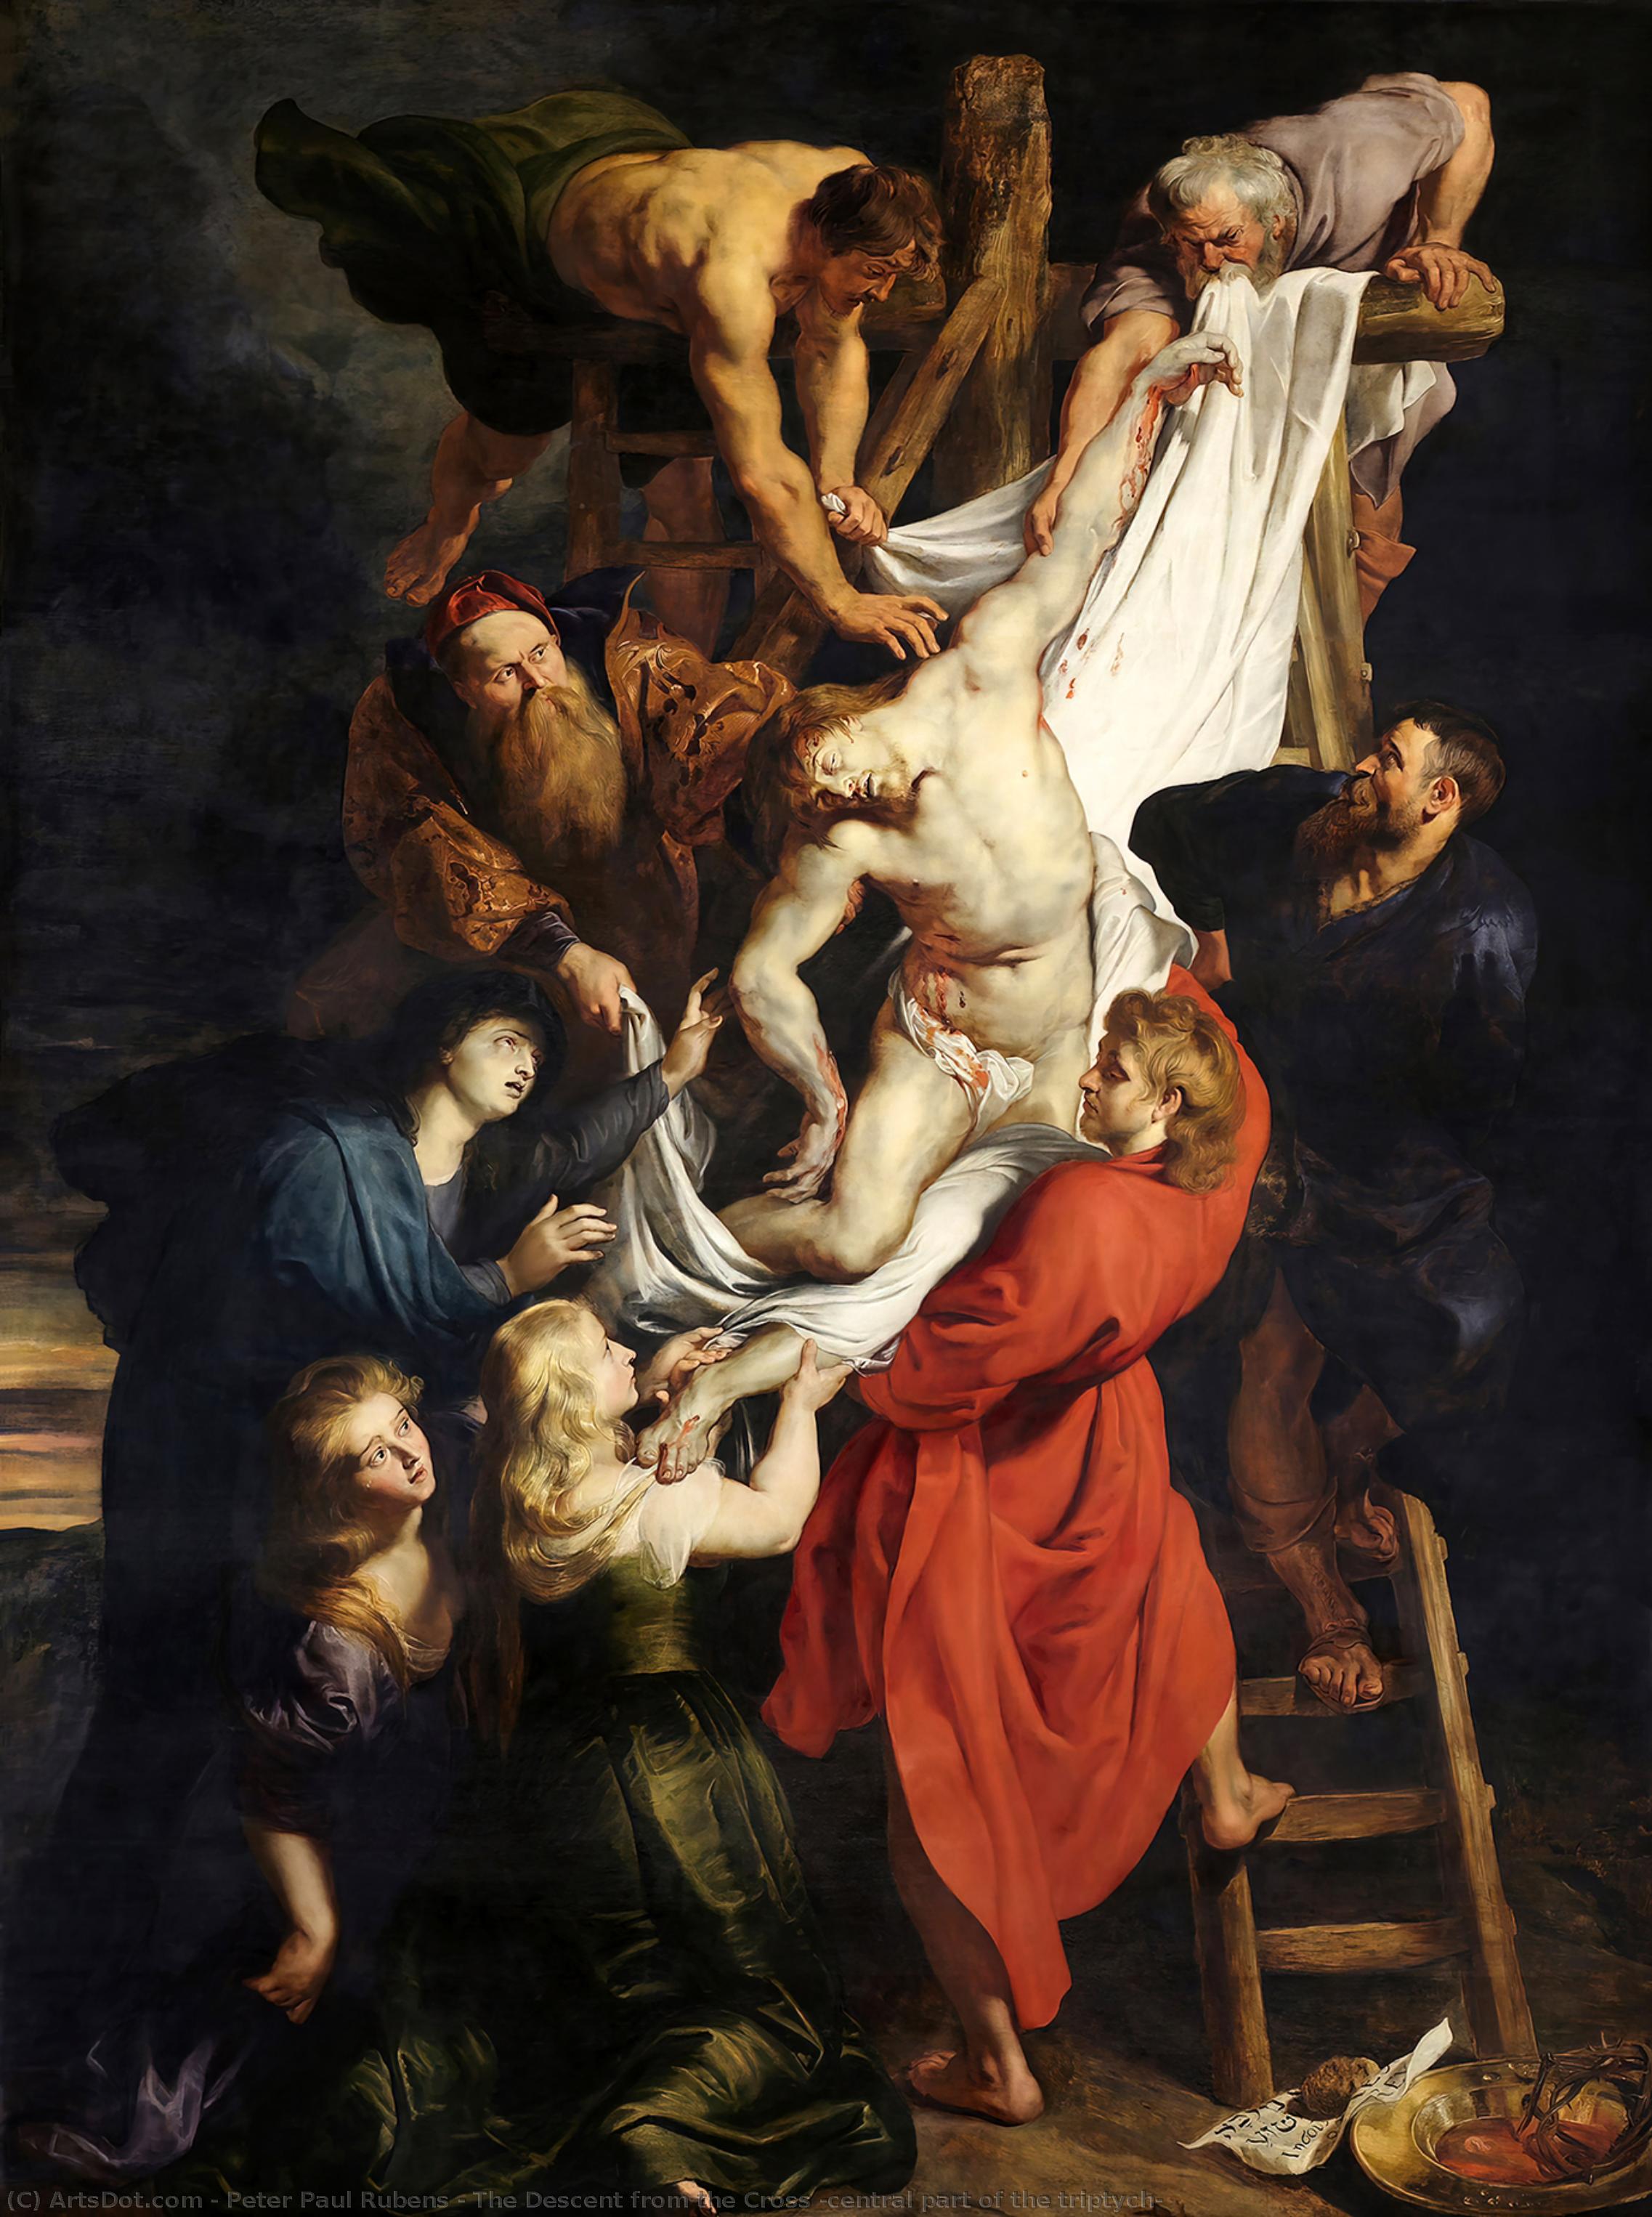 WikiOO.org - Encyclopedia of Fine Arts - Målning, konstverk Peter Paul Rubens - The Descent from the Cross (central part of the triptych)